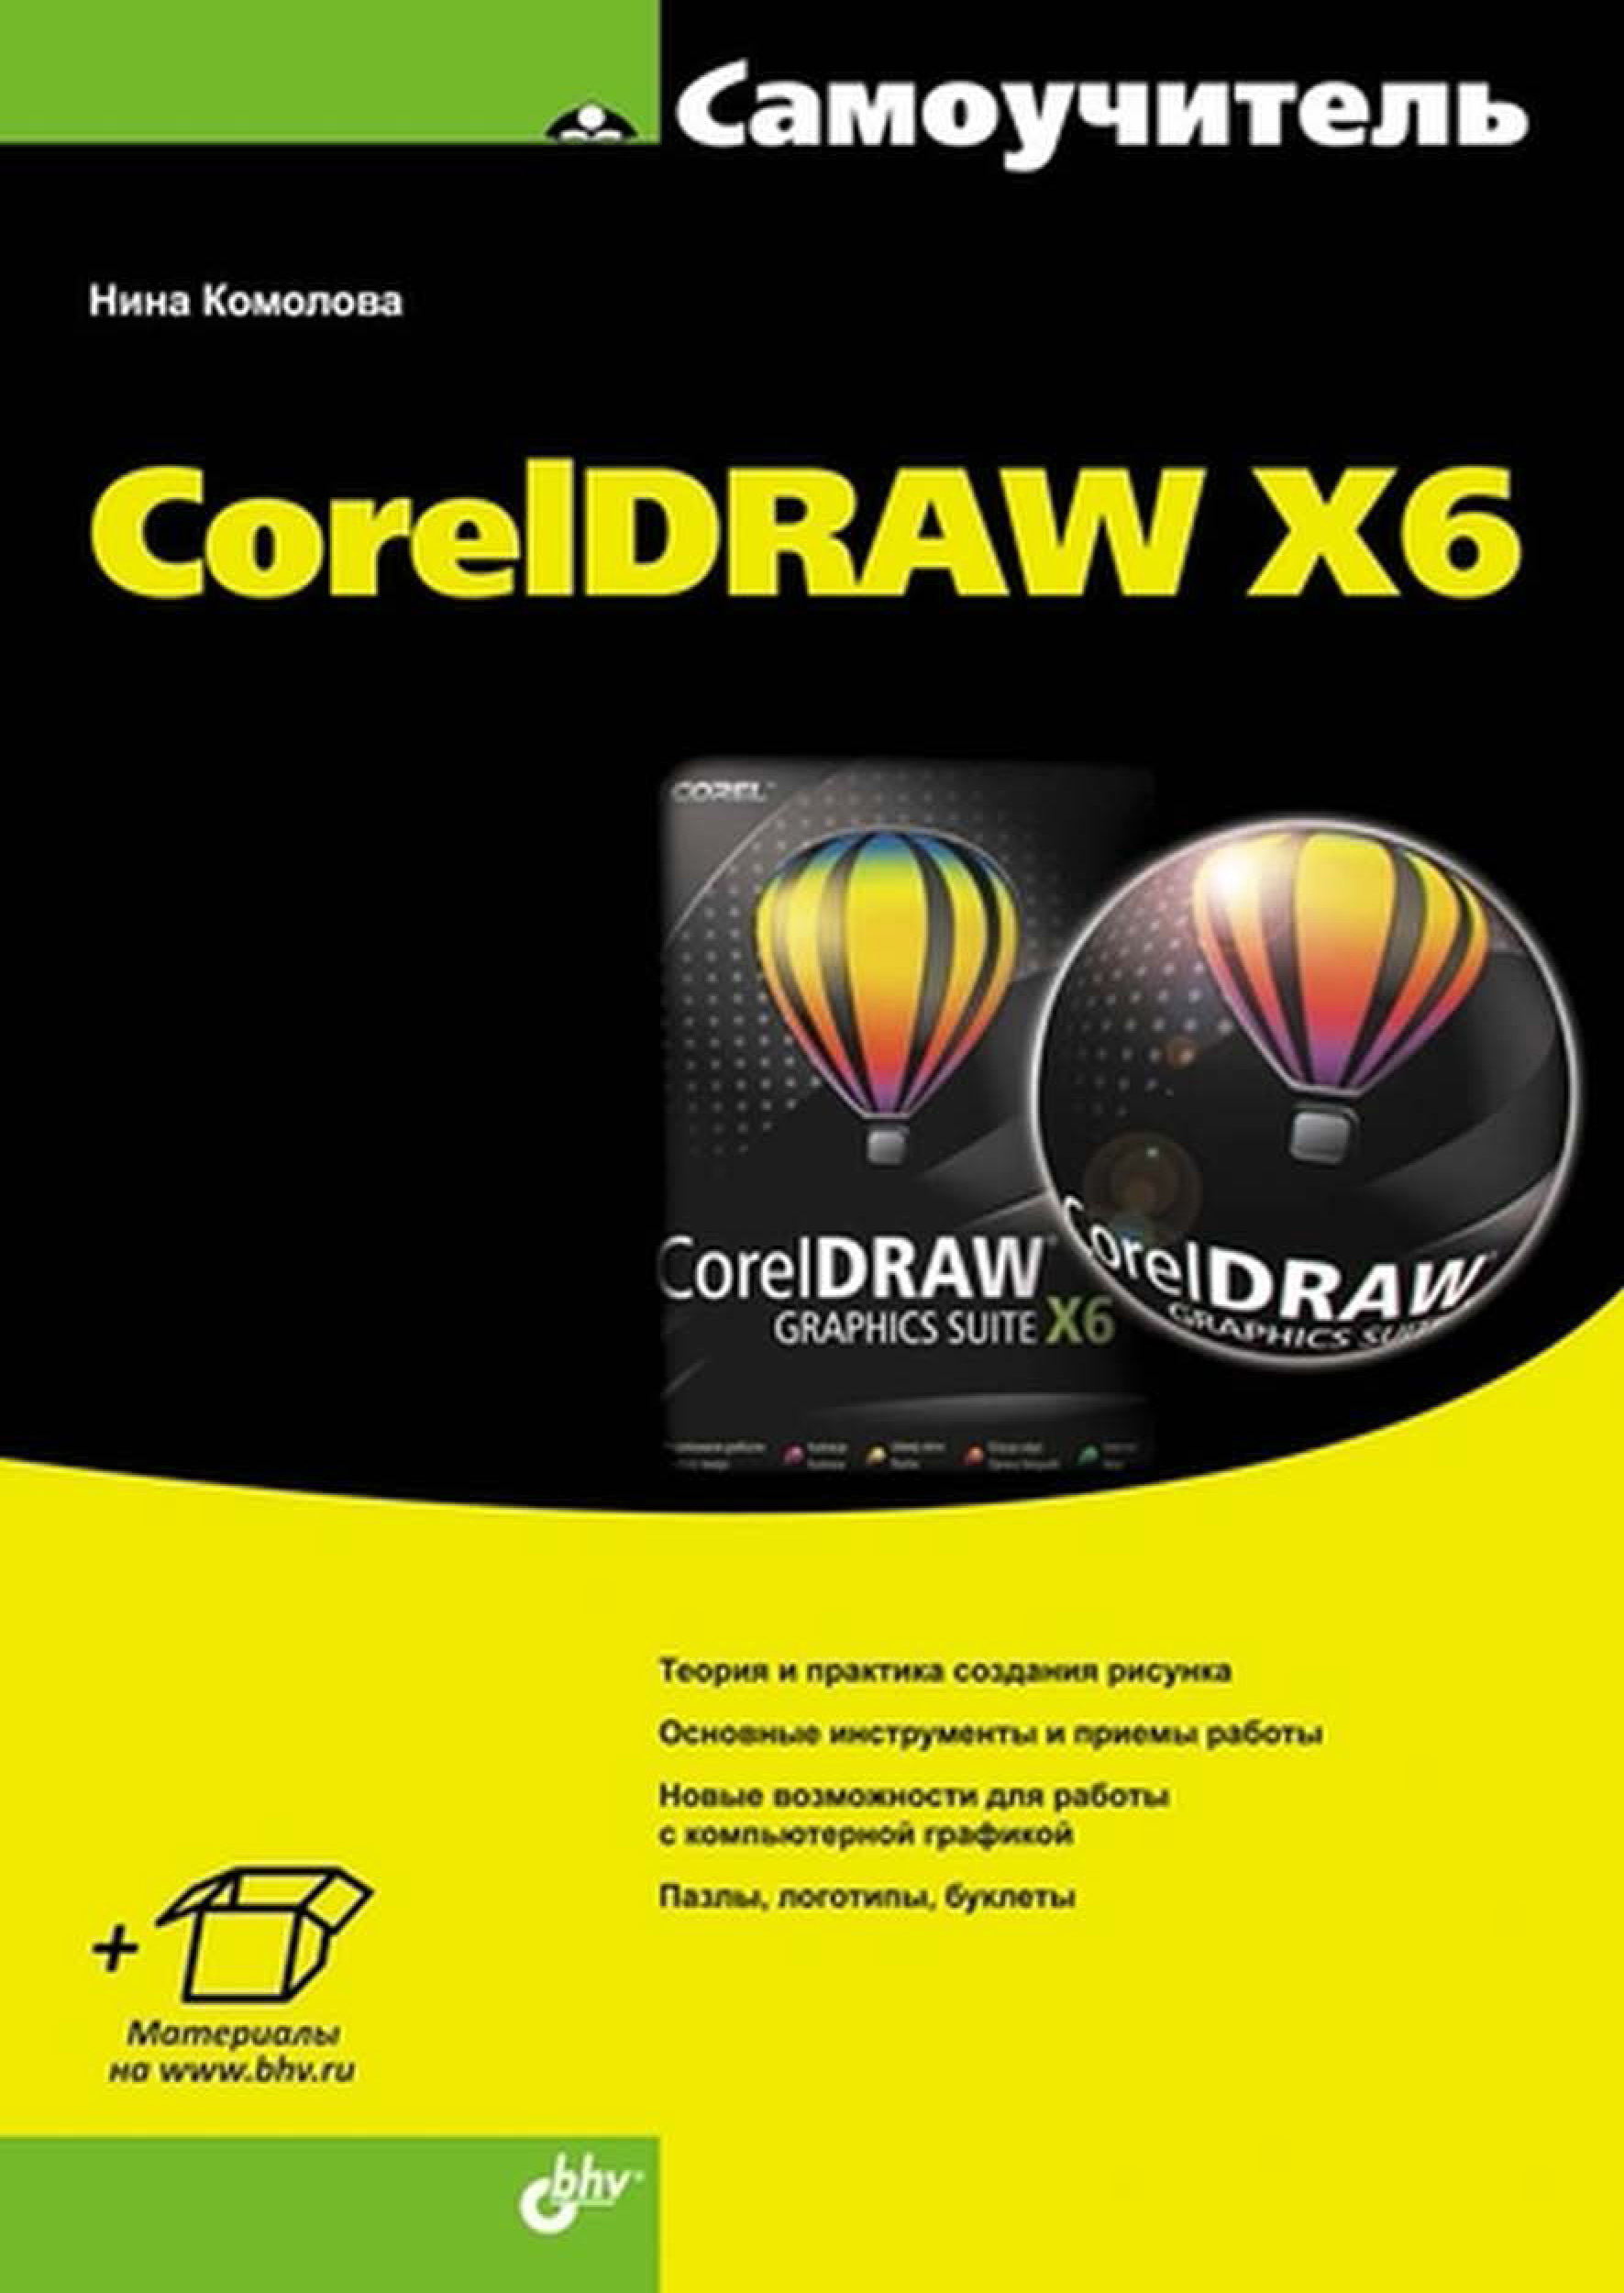 coreldraw x6 the official guide pdf free download